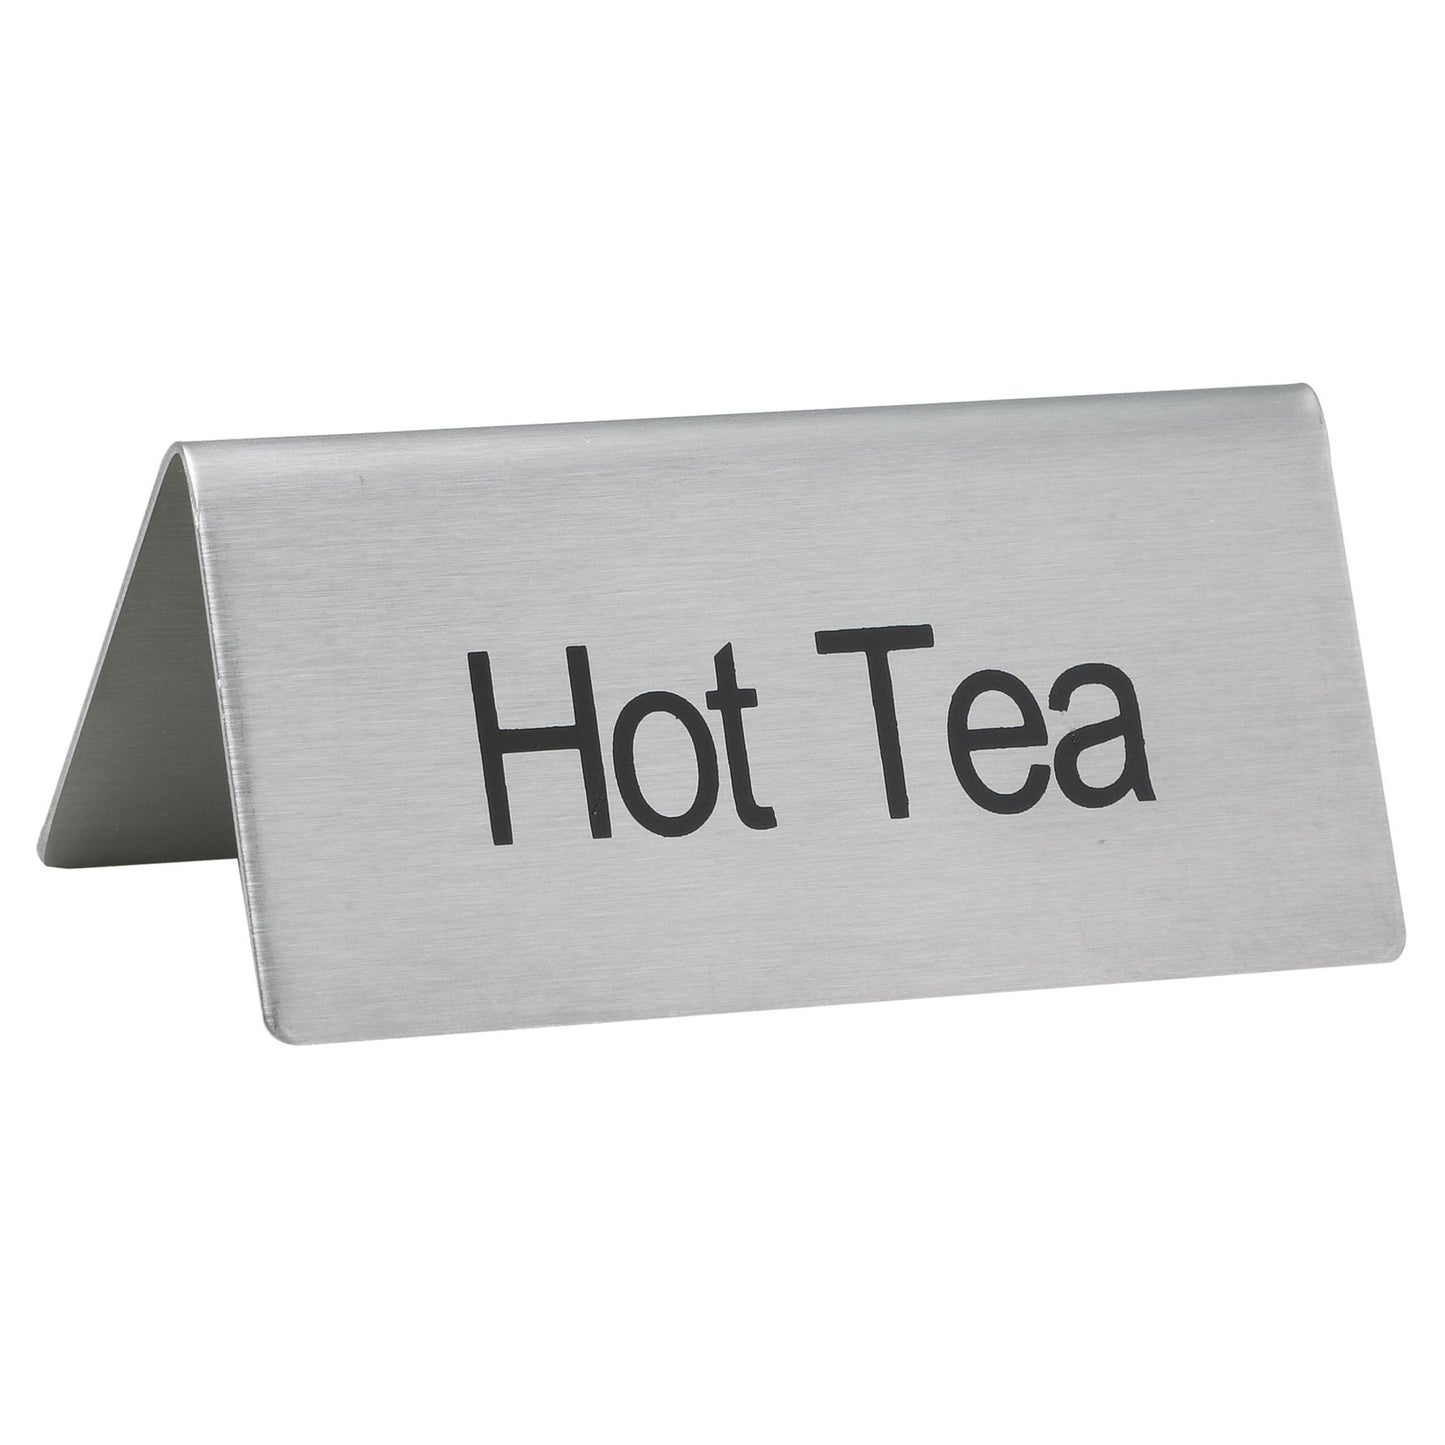 SGN-101 - Tent Sign, Stainless Steel - Hot Tea